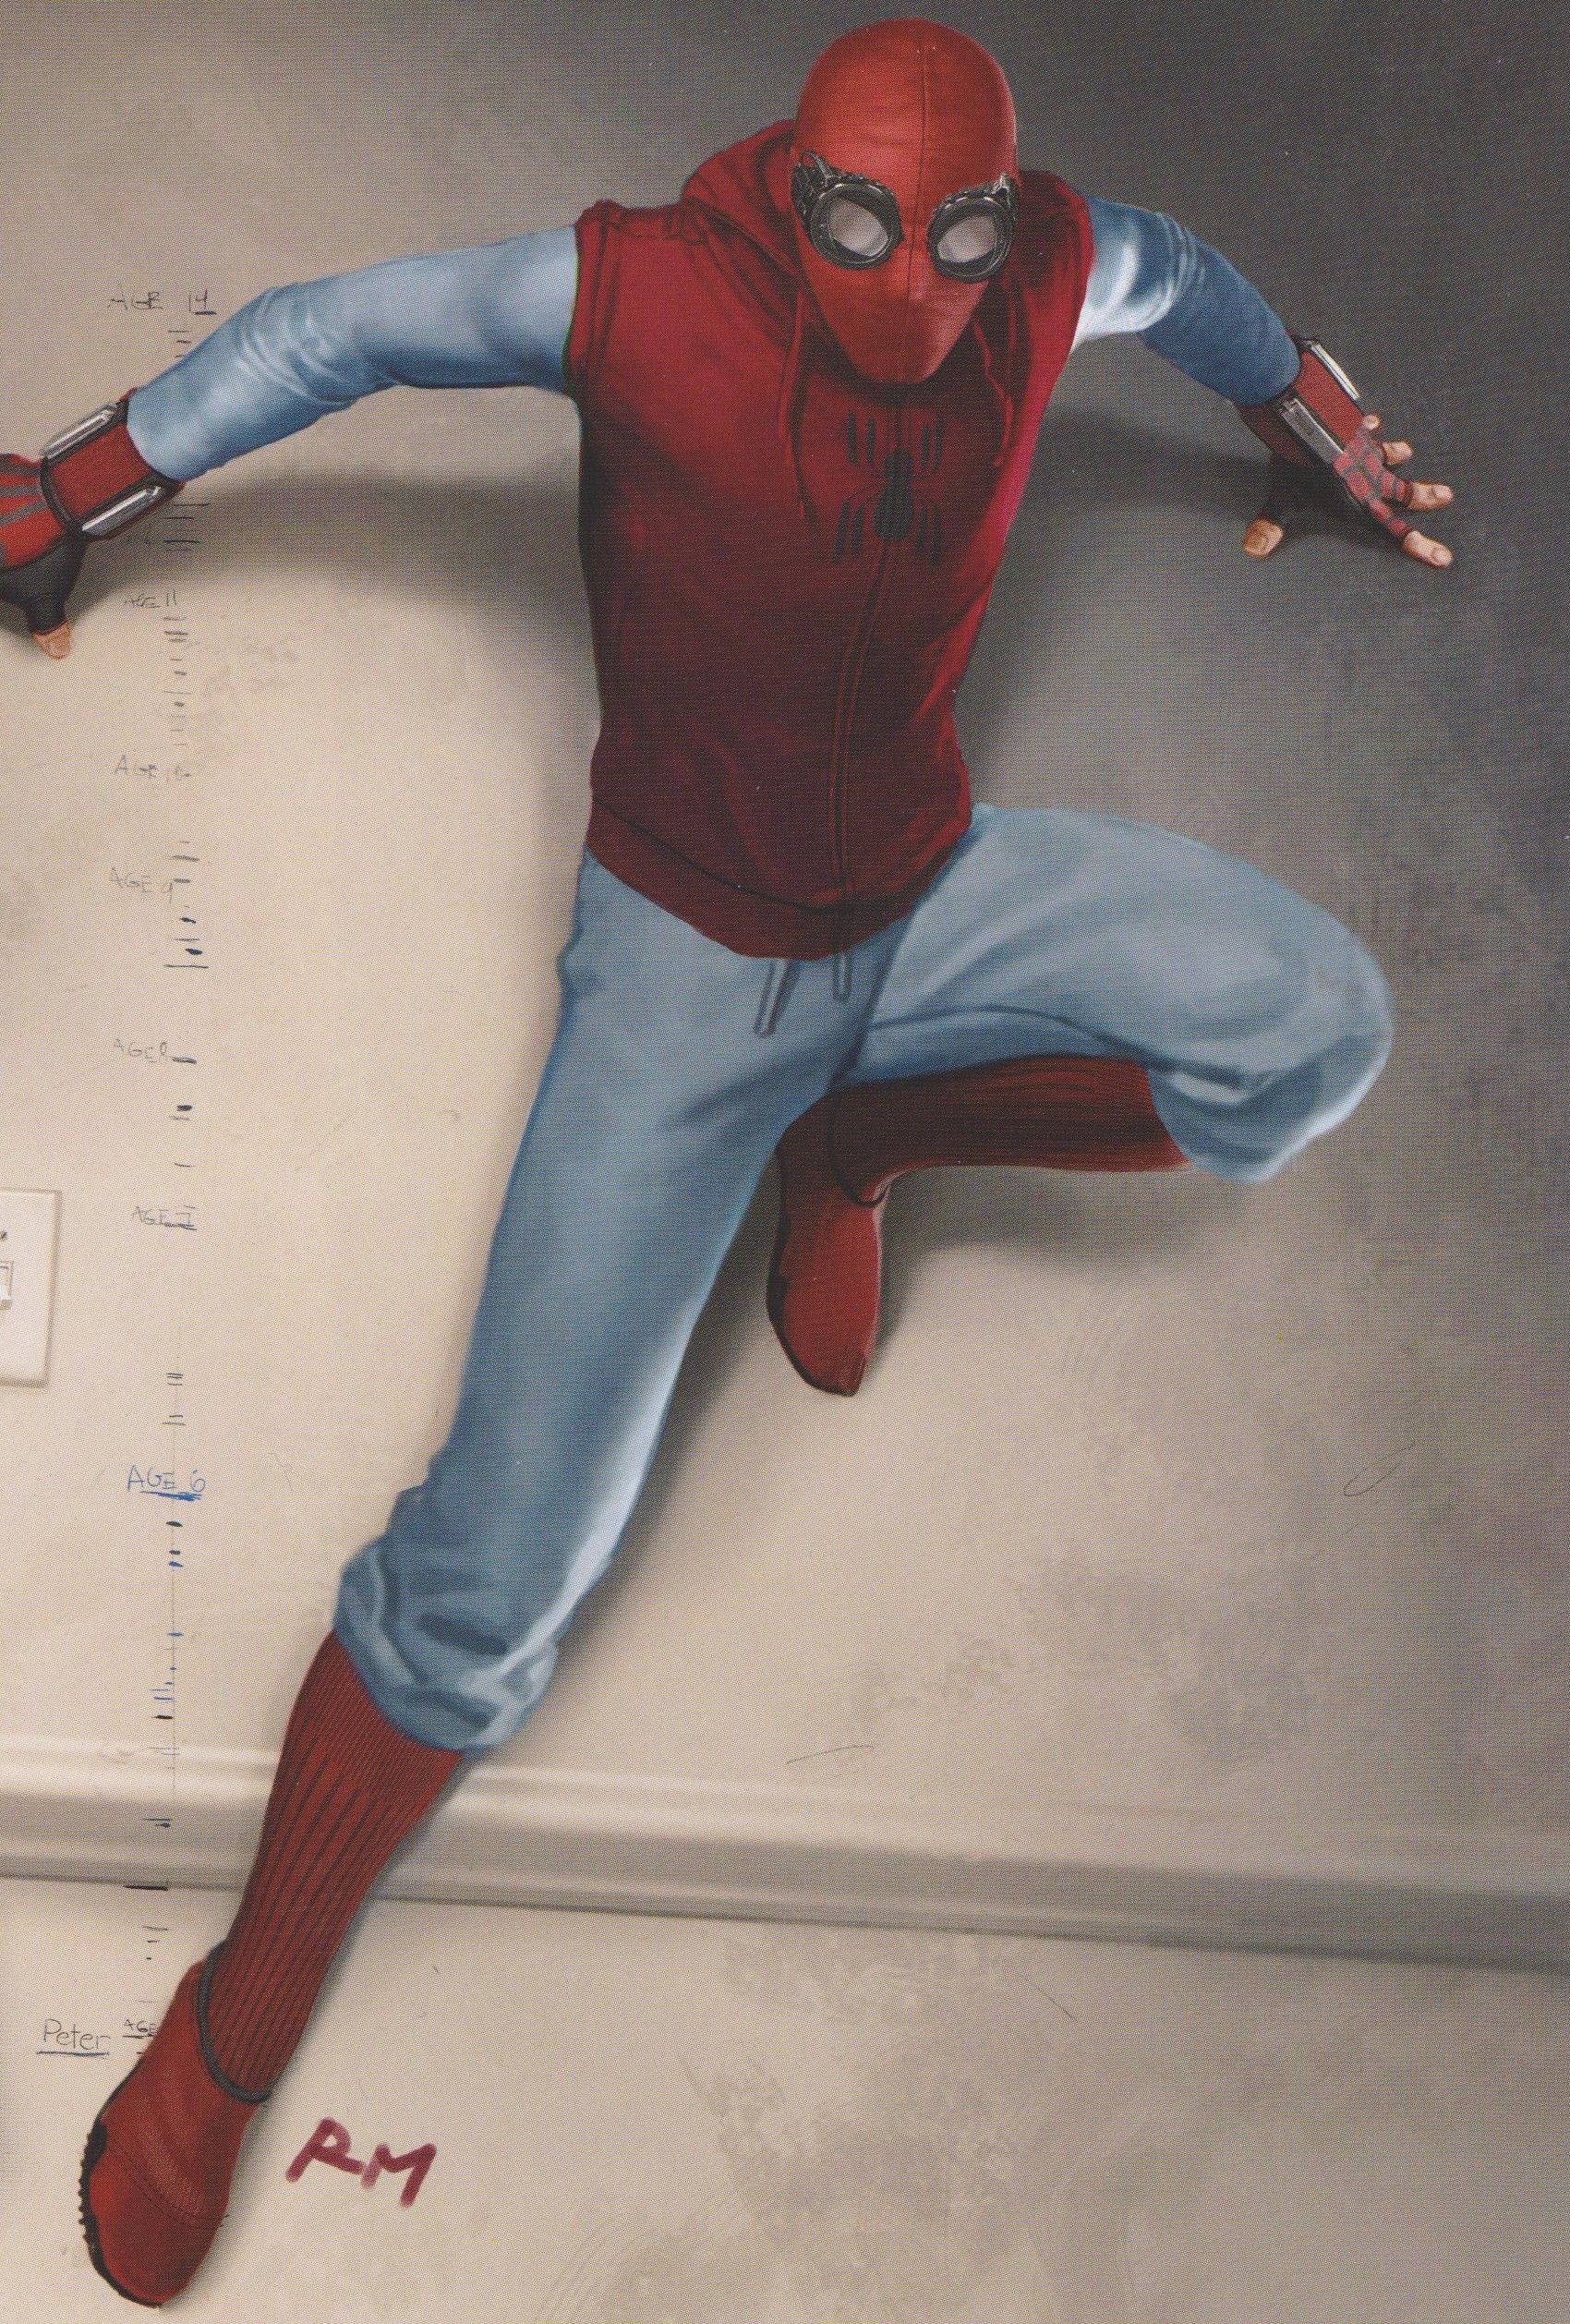 SPIDER MAN: HOMECOMING Homemade Suit Concept Art Takes Unexpected